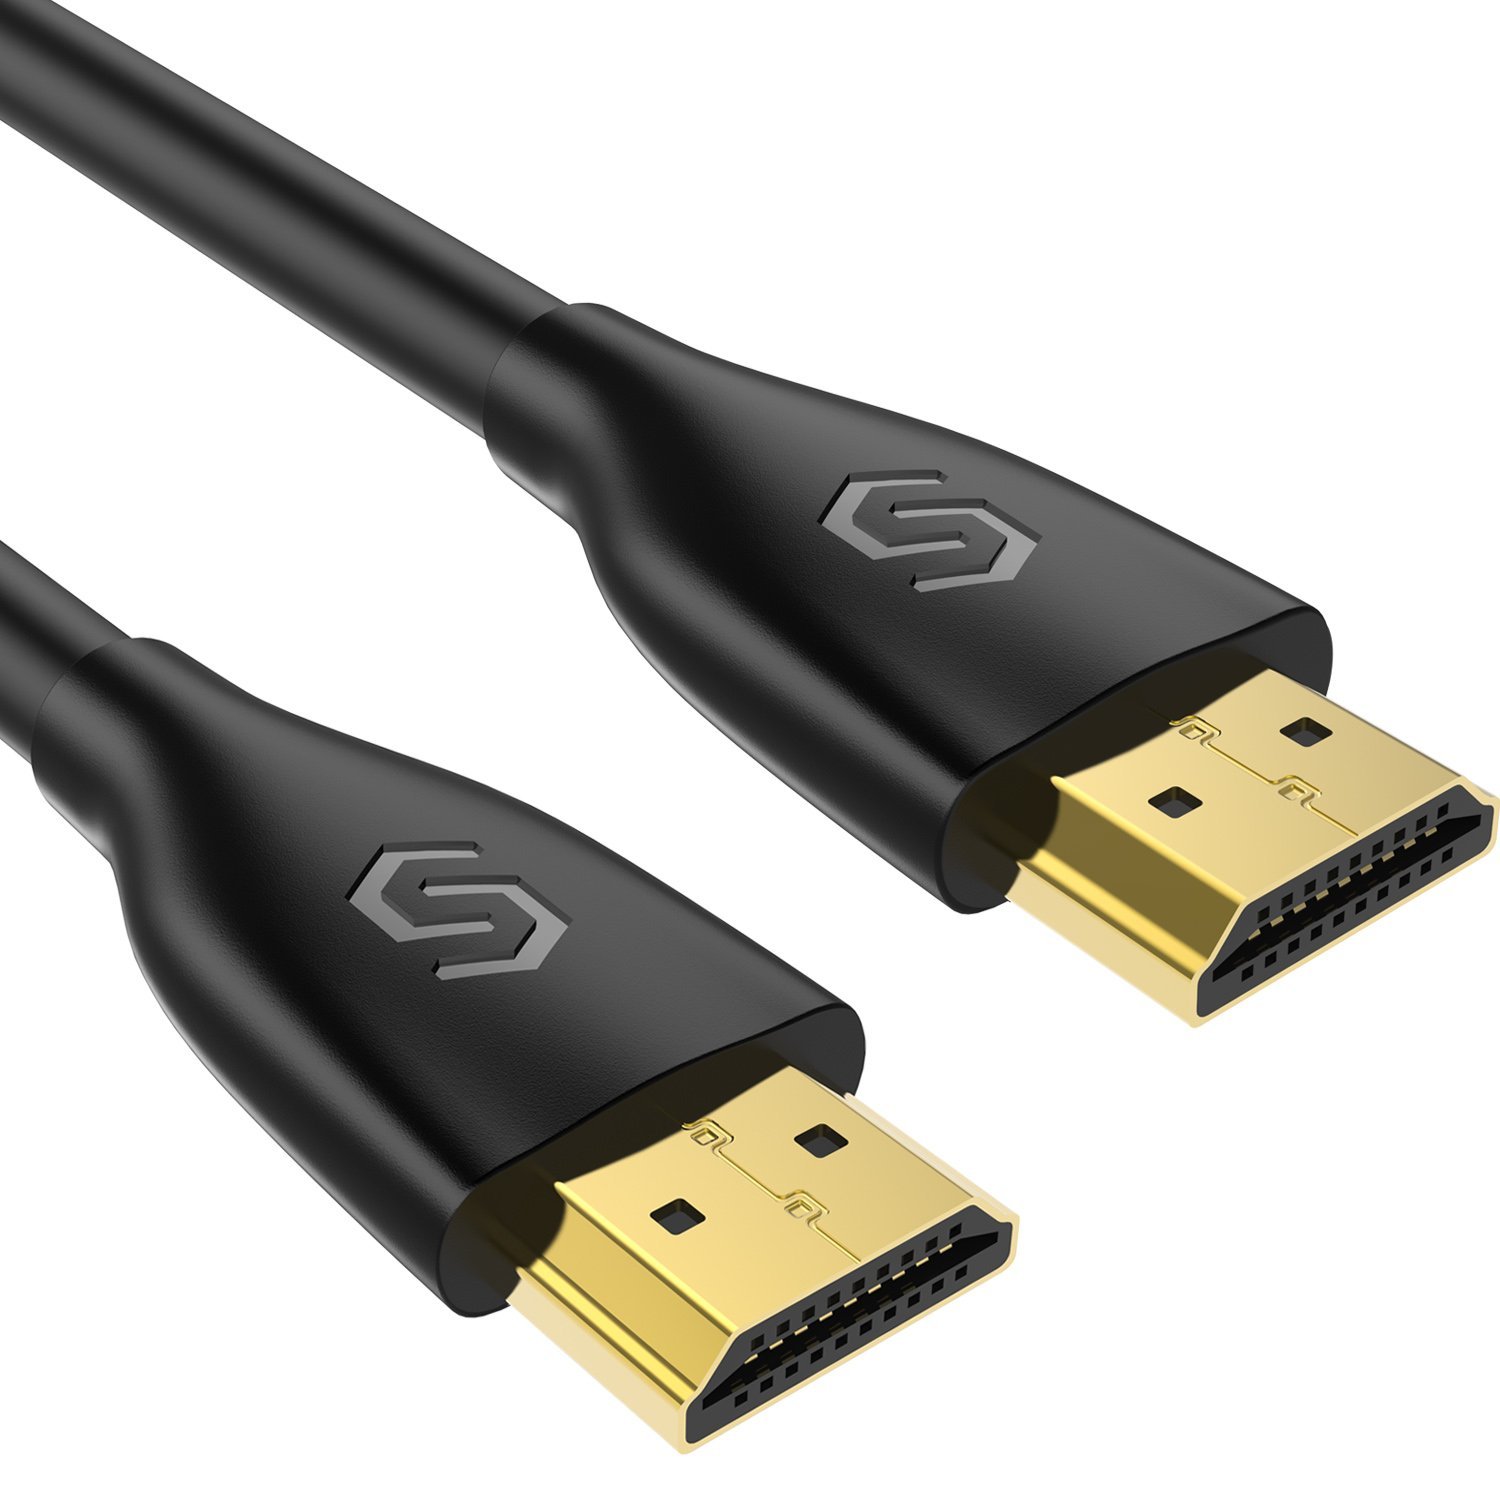 Amazon.com: HDMI Cable Syncwire 6.5ft HDMI Cord - Ultra High Speed ...